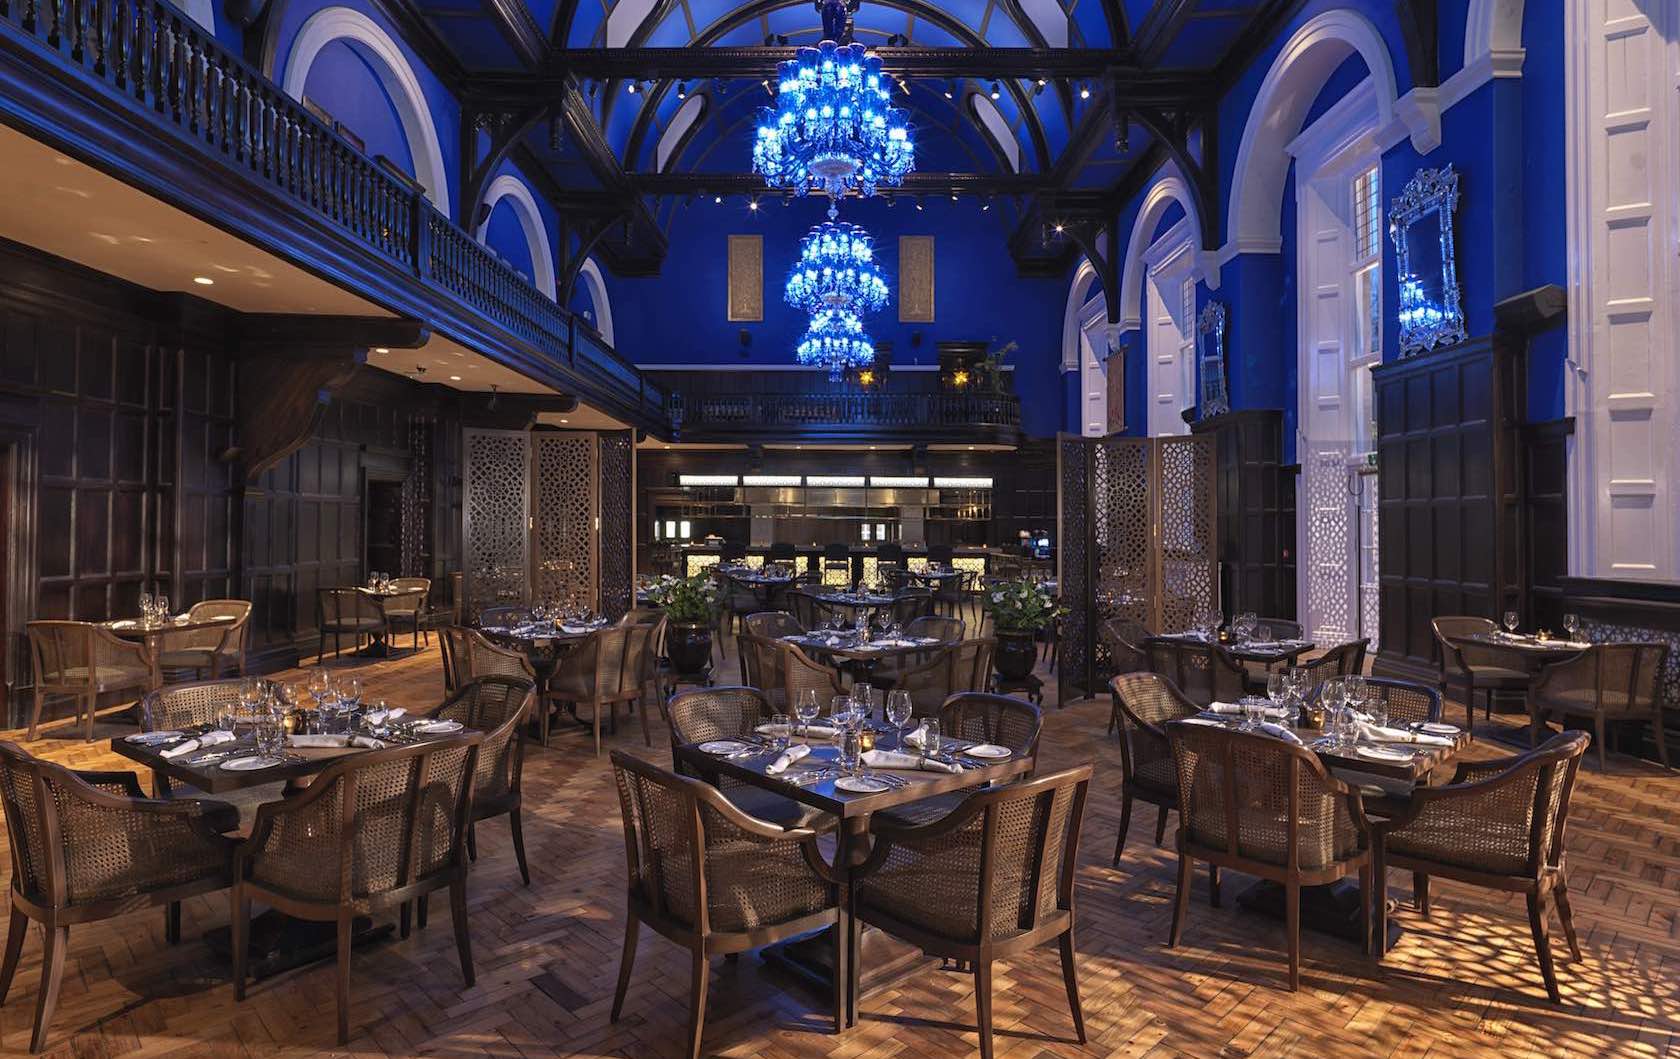 London's Best Indian Restaurants by London Perfect